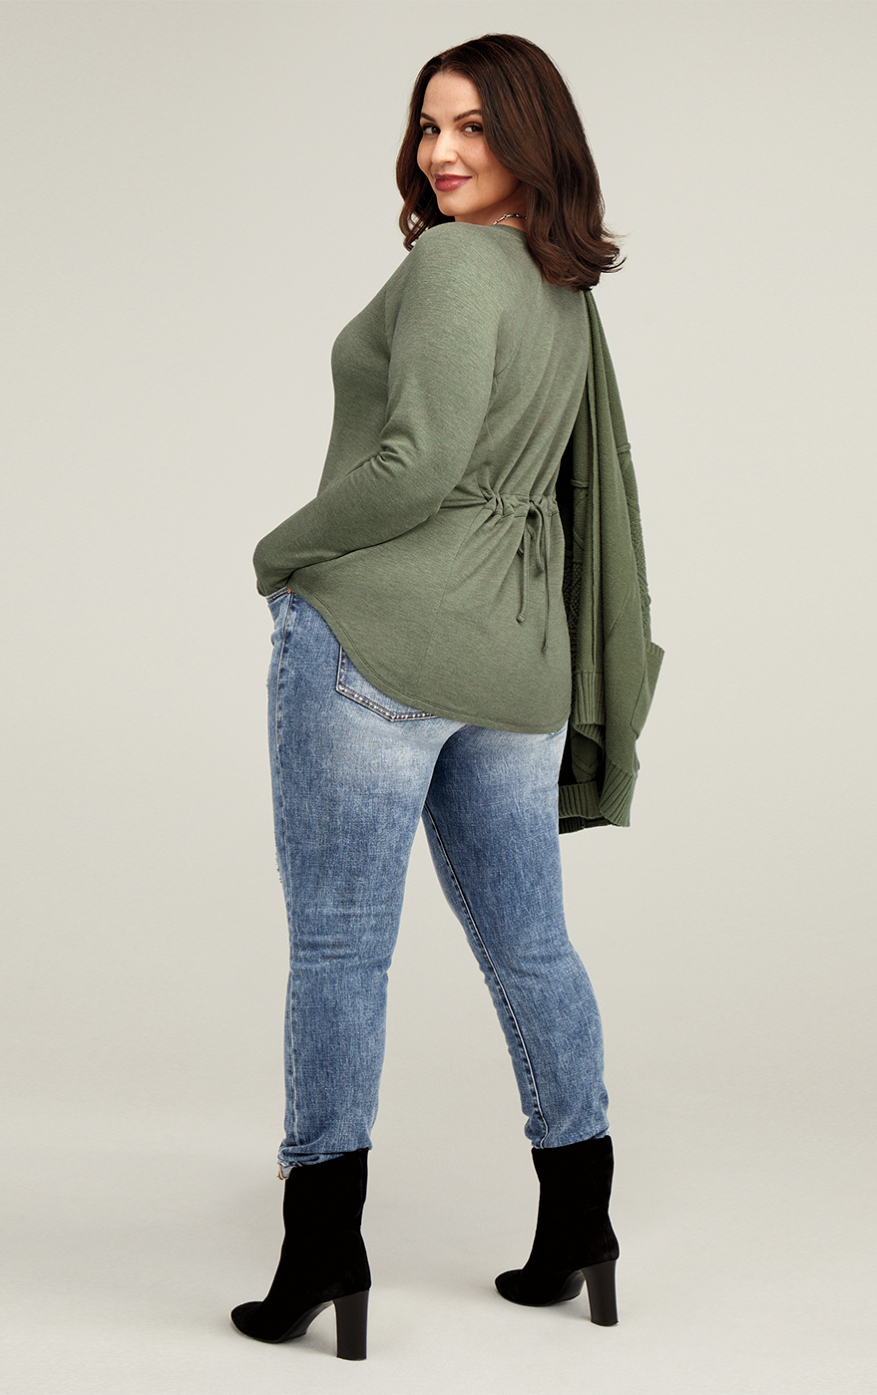 Trinity Stitch Cardigan in Olive, Cinch Skinny in Adventure Wash, Recline Tee in Heather Olive